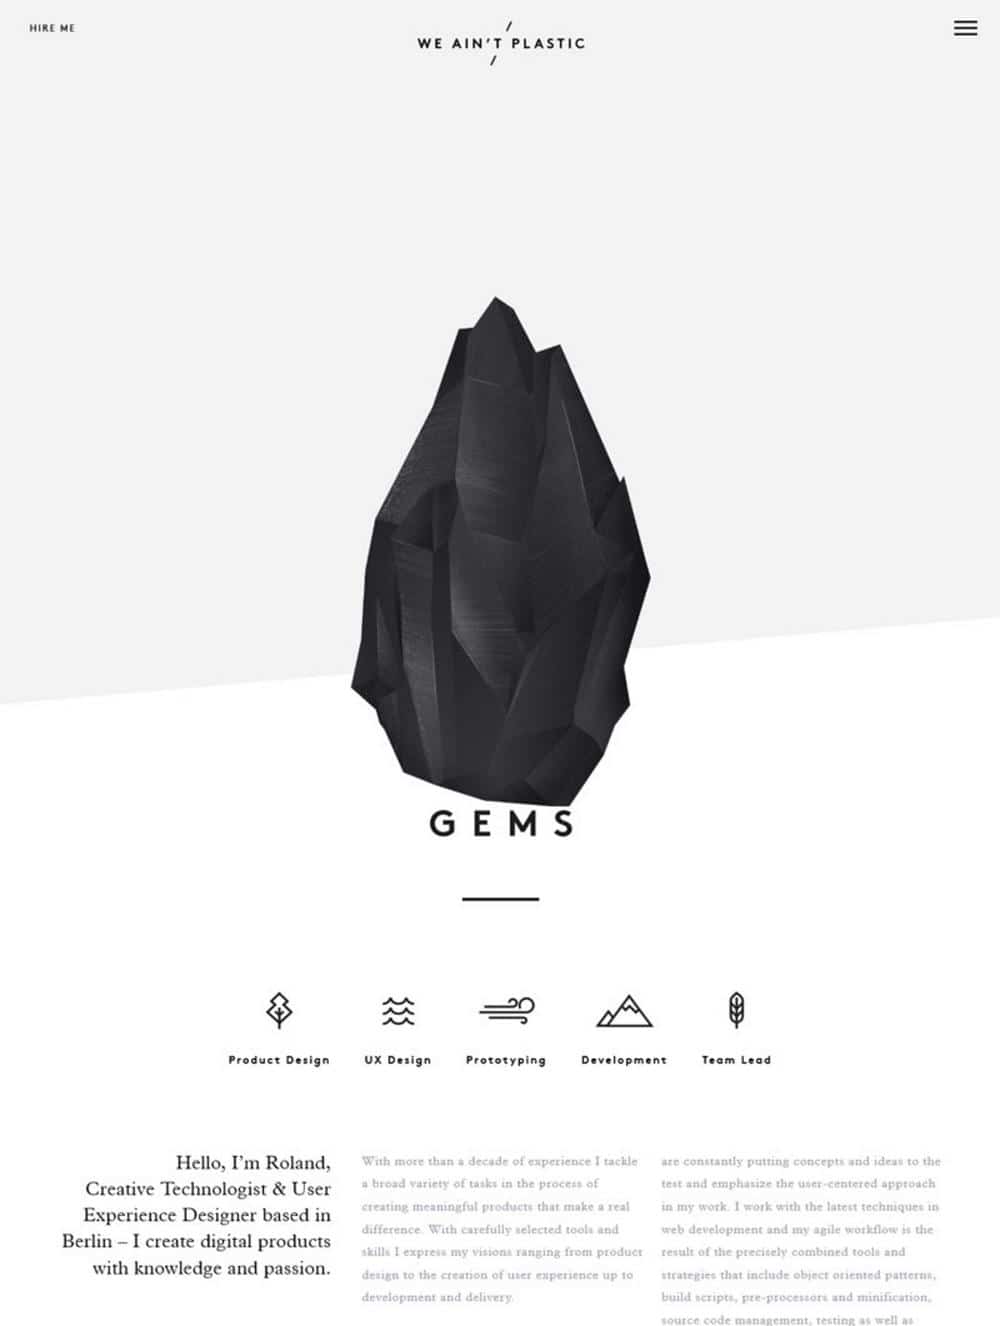 Black and White Hex Logo - 26 Beautiful Website Color Schemes [With CSS Hex Codes]